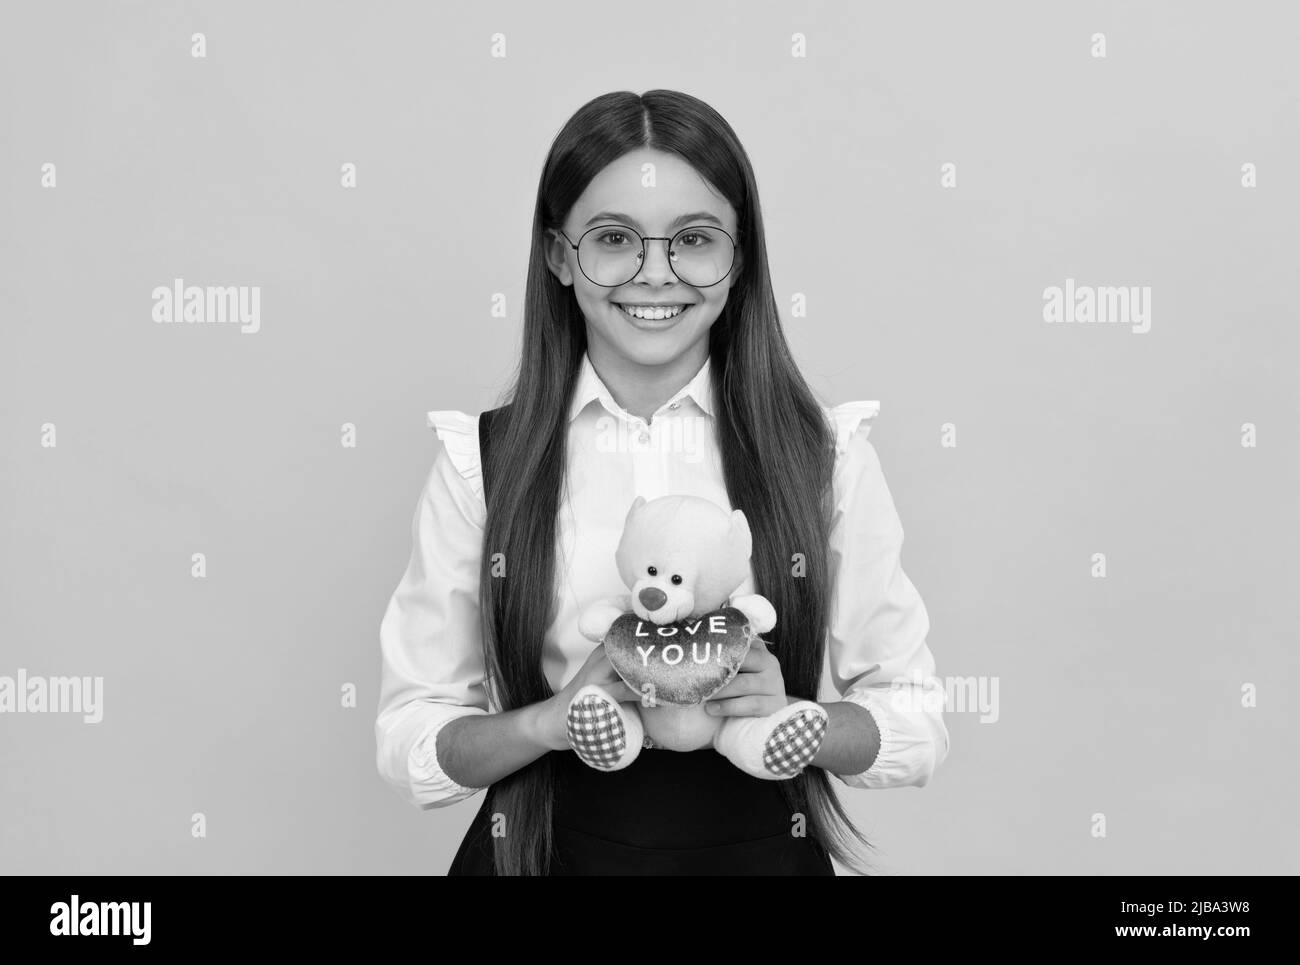 Love you. Happy child smile holding teddy bear. Valentines gift. February 14. Valentines day Stock Photo